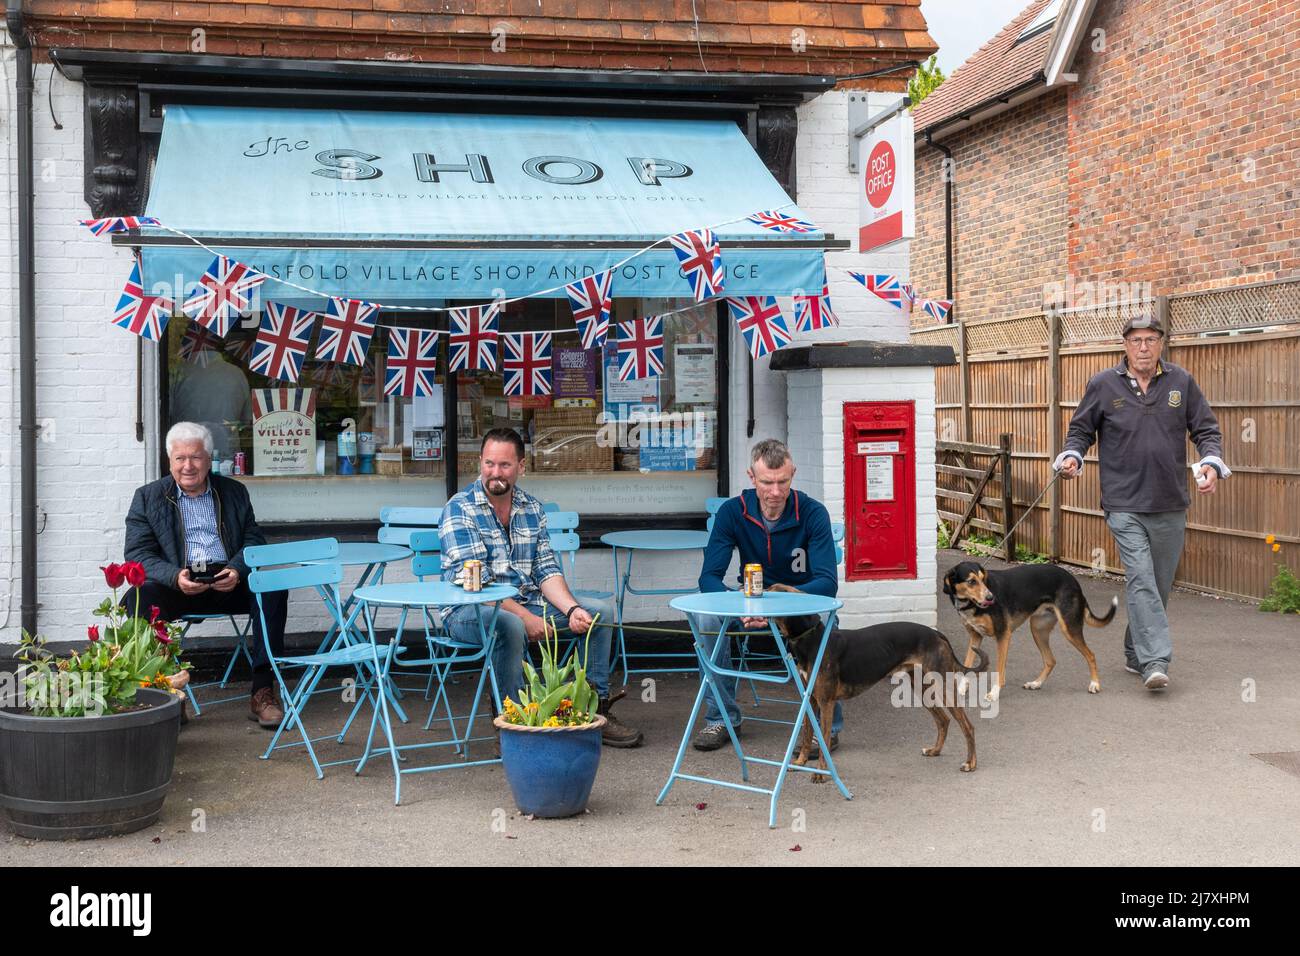 Dunsfold village shop, Surrey, England, UK, on the day of the annual fete with men sitting outside having drinks Stock Photo